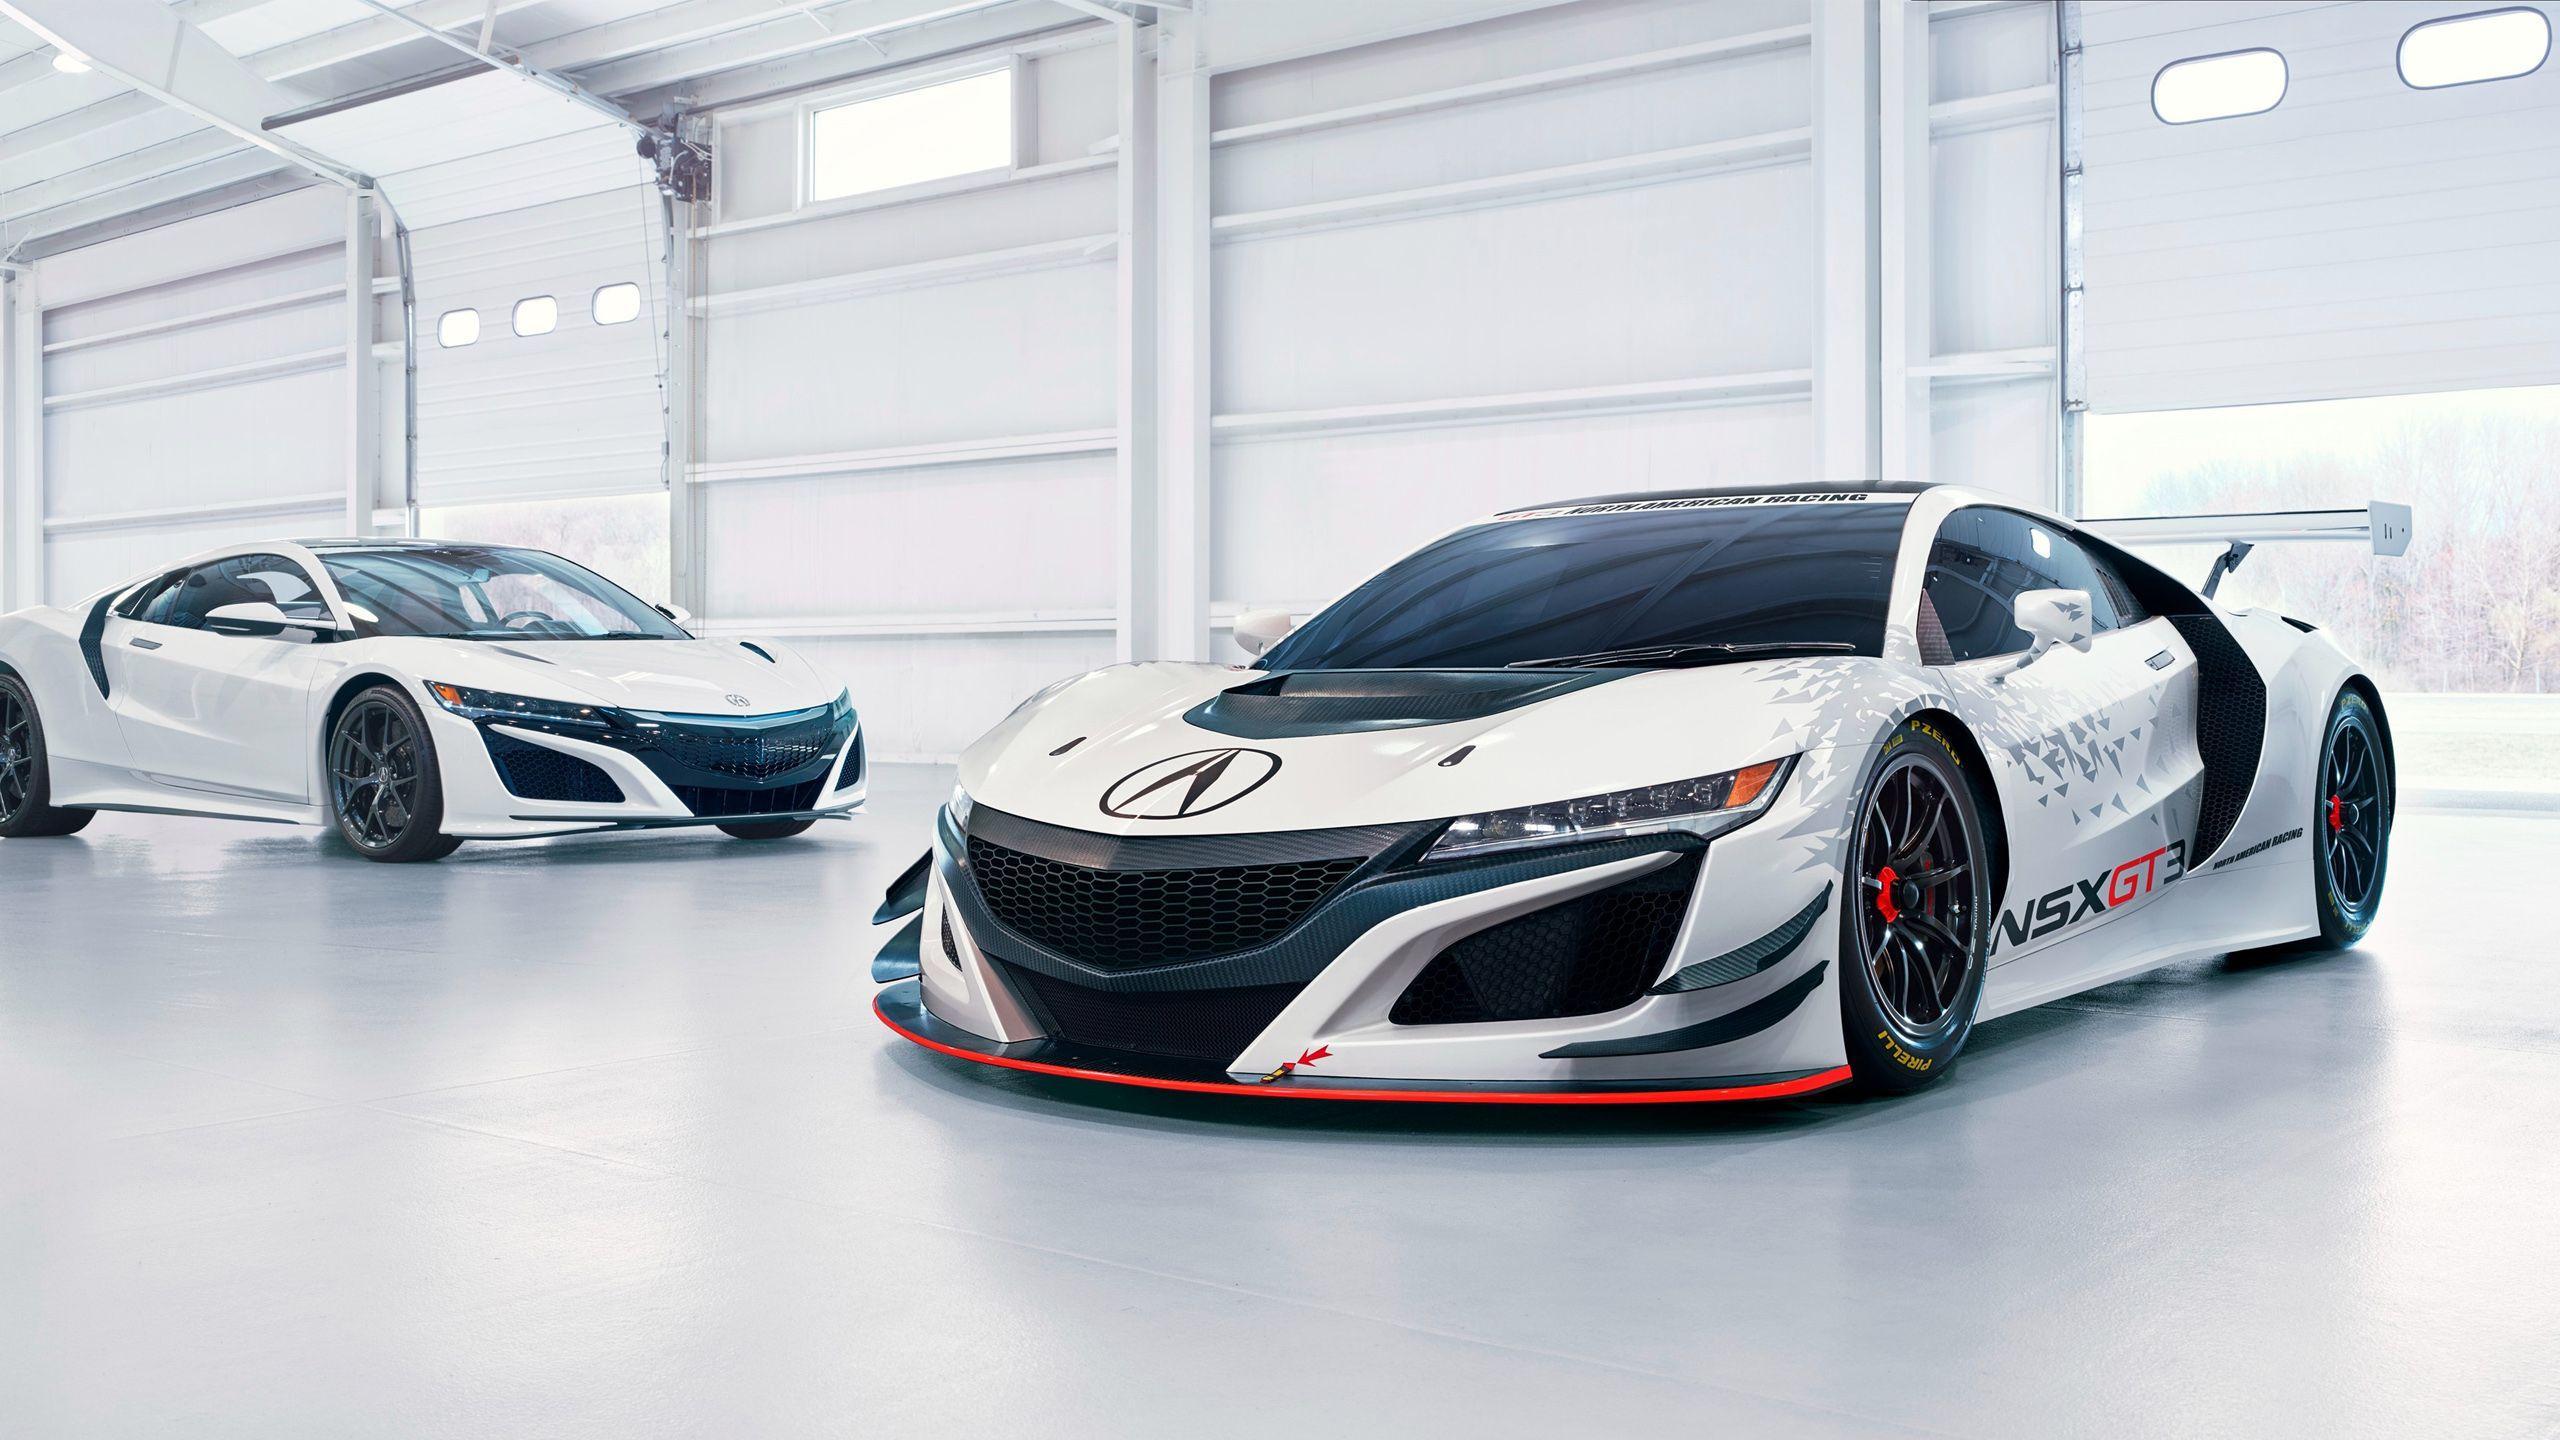 Acura NSX GT Wallpapers